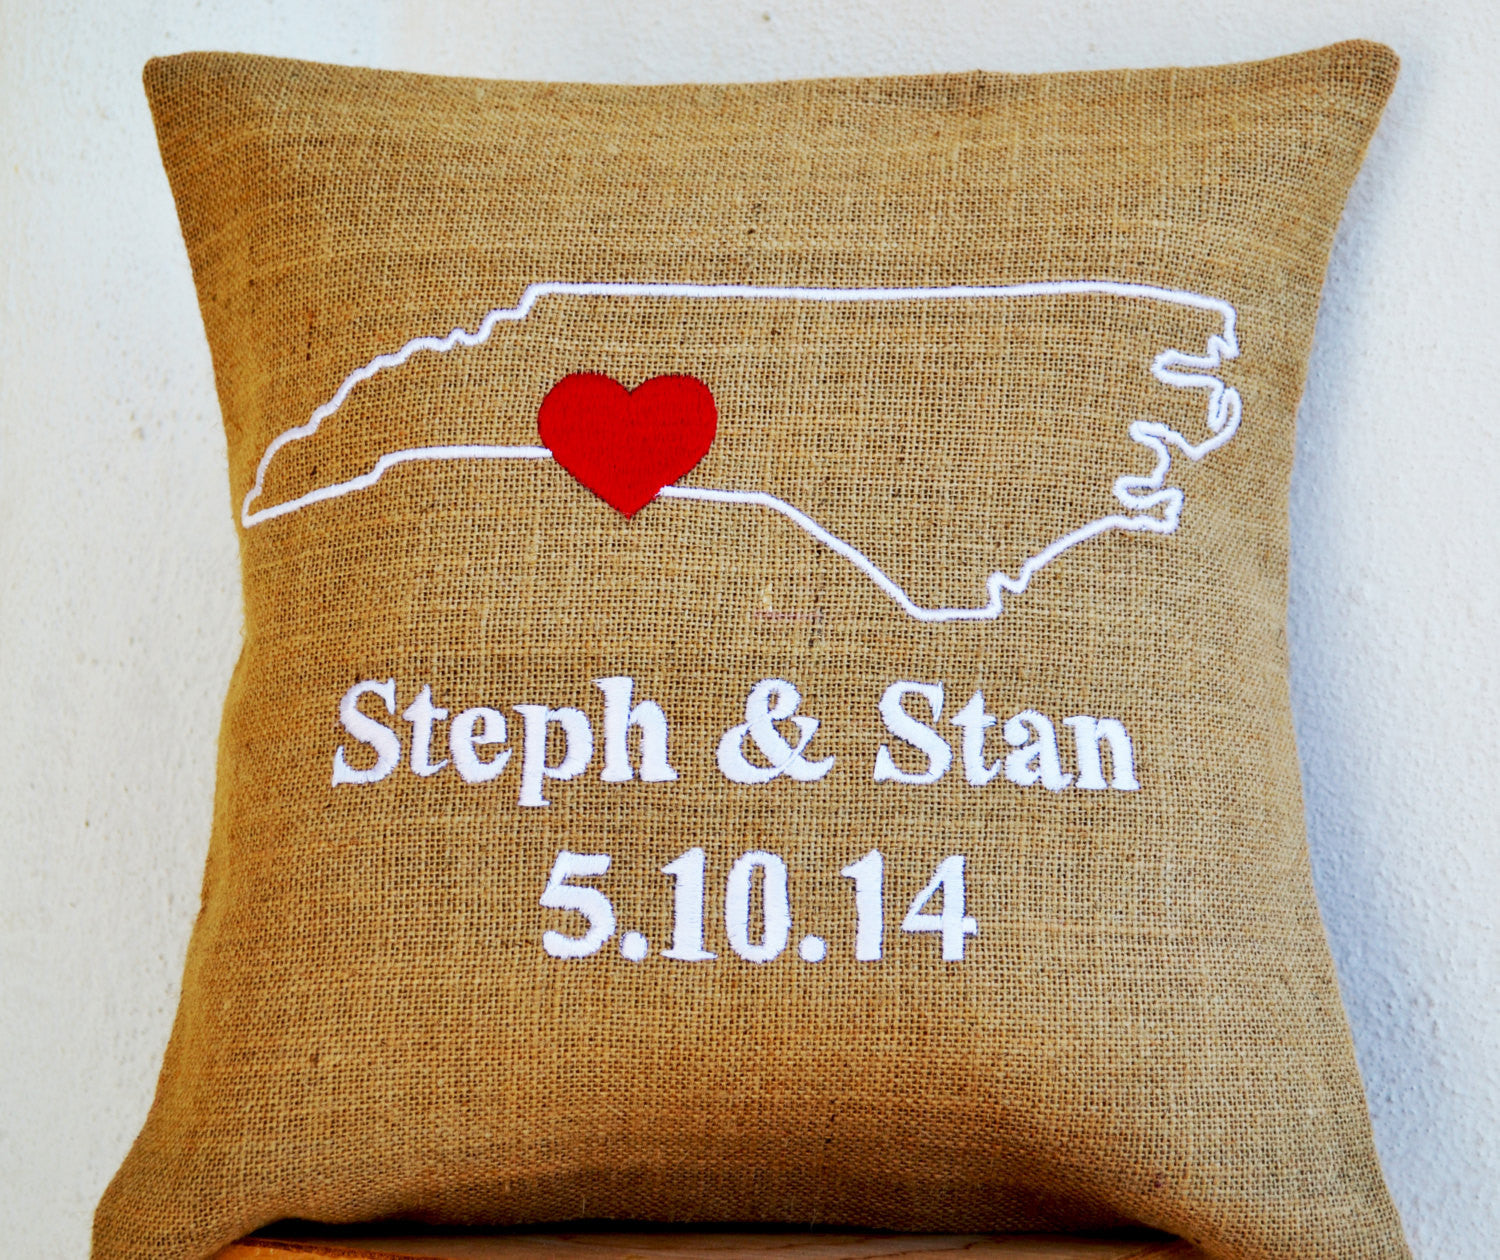 Handmade burlap pillow case with state embroidery